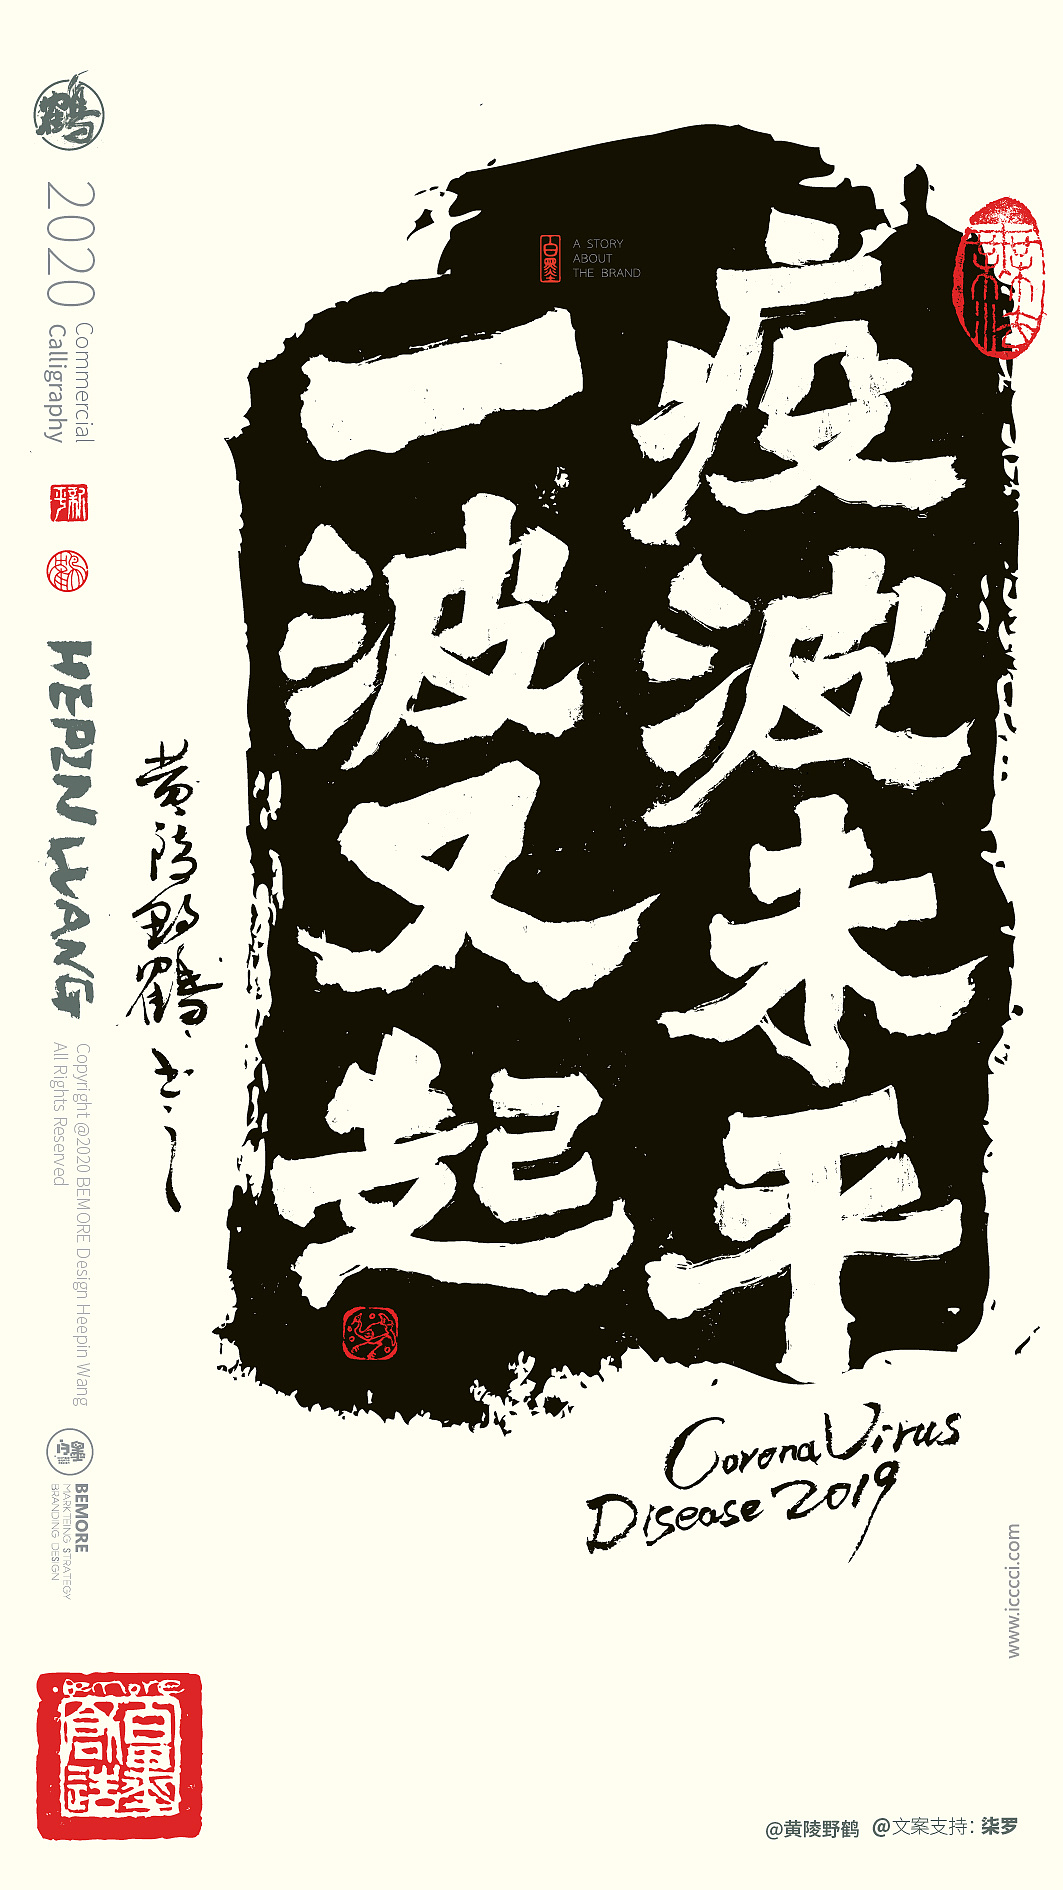 Chinese Creative Font Design-I am Huang Ling Ye He who is dedicated to the application of calligraphy as a commercial trend.